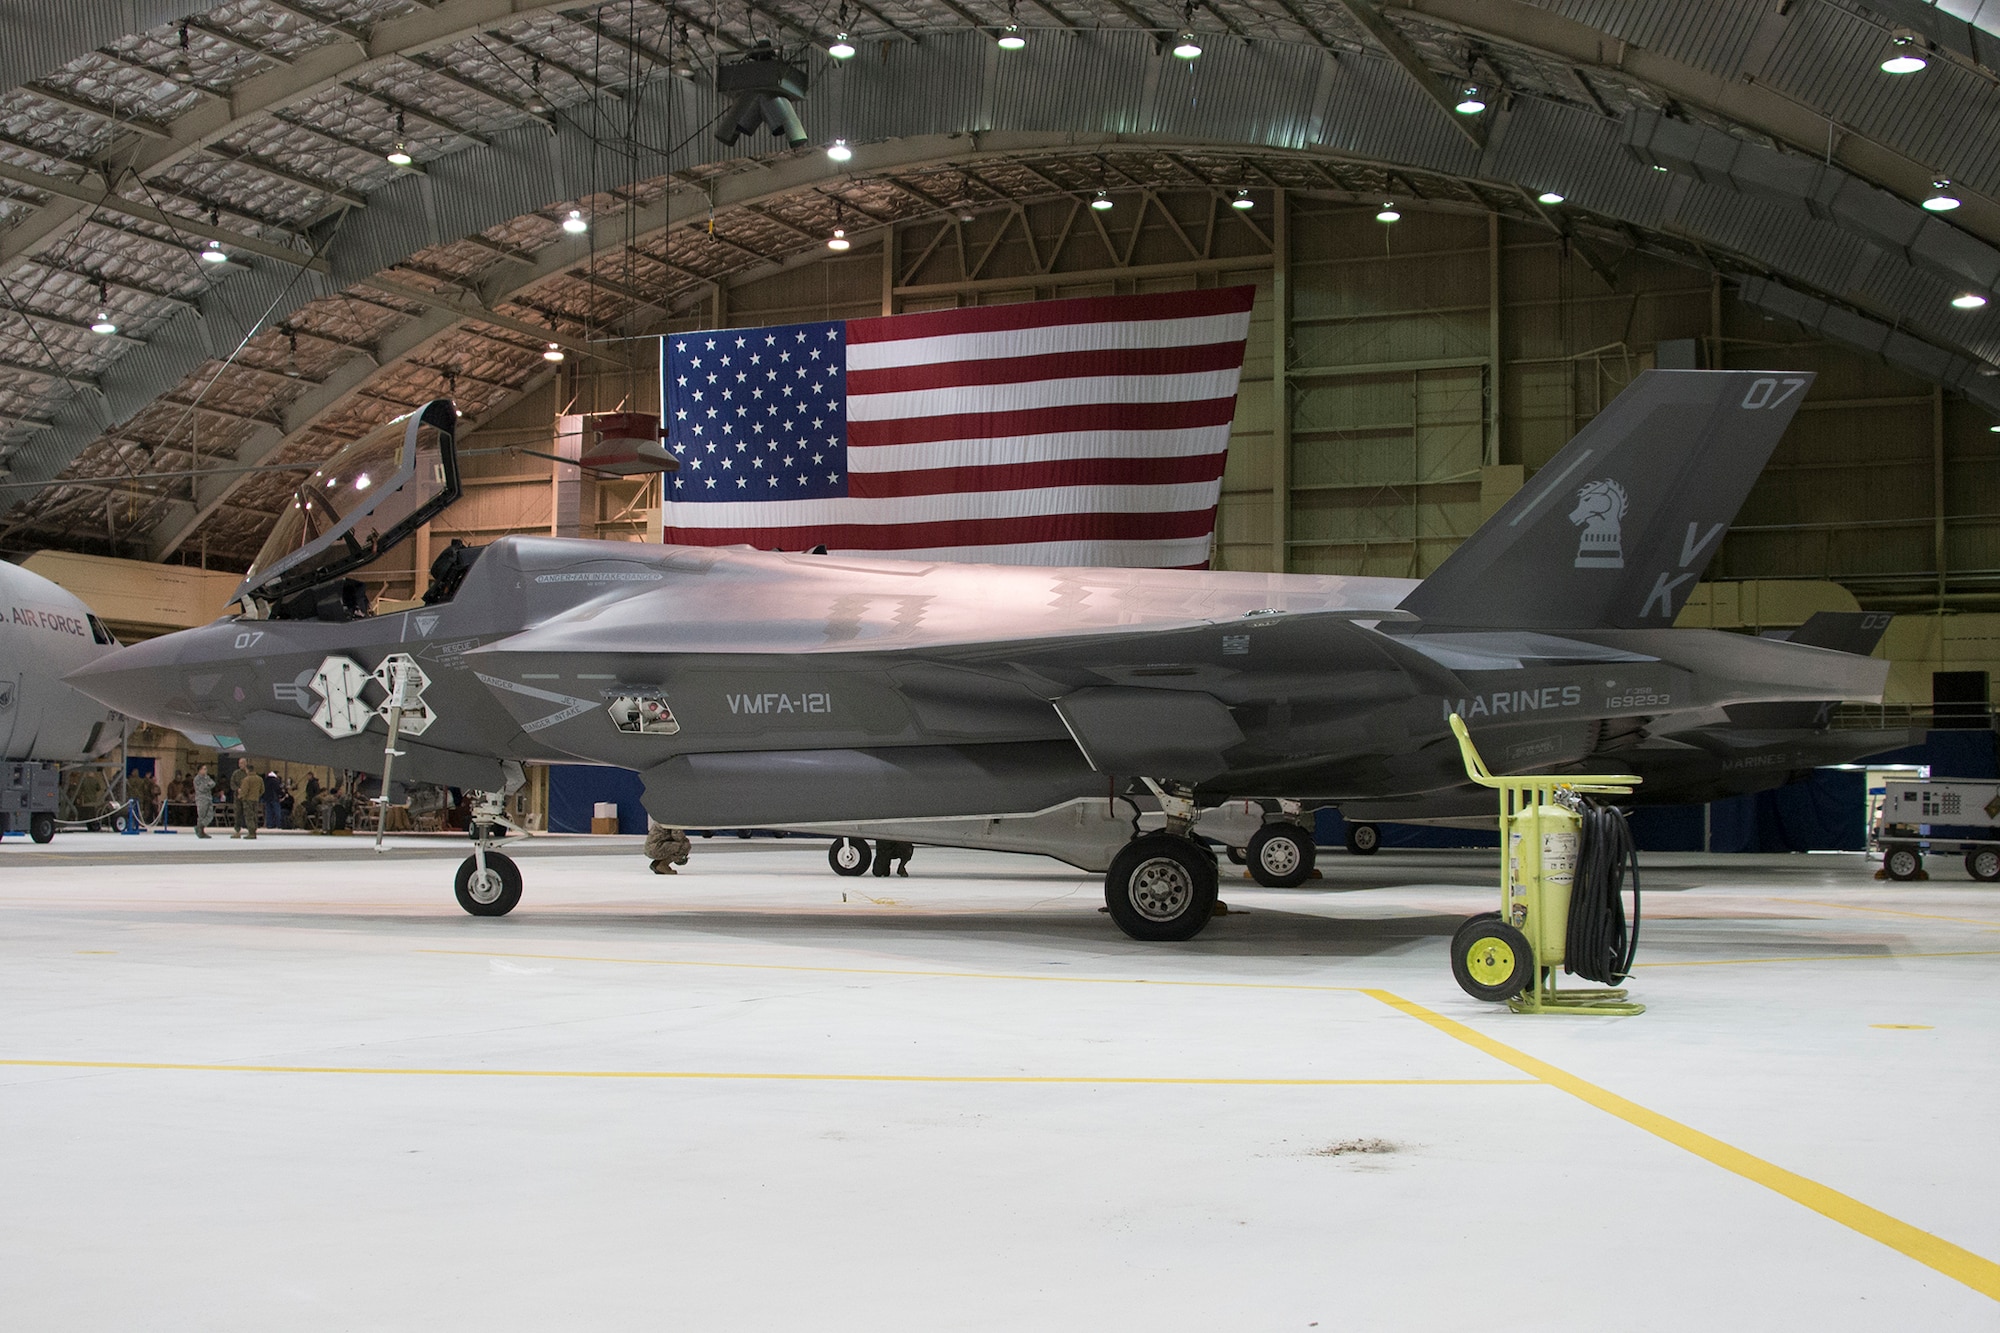 An F-35B Lightening II with Marine Fighter Attack Squadron 121, 3rd Marine Aircraft Wing out of Marine Corps Air Station Yuma, Ariz., stopped at Joint Base Elmendorf-Richardson, Alaska en route to Marine Corps Air Station Iwakuni, Japan, Jan. 12, 2017. 
The VMFA-121 was the first operational F-35B squadron in the Marine Corps, with its relocation to 1st Marine Aircraft Wing at Iwakuni. The F-35B was developed to replace the Marine Corps' F/A-18 Hornet, AV-8B Harrier and EA- 6B Prowler. The Short Take-off Vertical Landing (STOVL) sensor technology, and electronic warfare systems bring all of the access and lethality capabilities of a fifth-generation fighter, a modern bomber, and an adverse-weather, all-threat environment air support platform. 
U.S Air Force Photo by Staff Sgt. Mike Campbell
Joint Base Elmendorf-Richardson, AK, UNITED STATES
01.12.2017